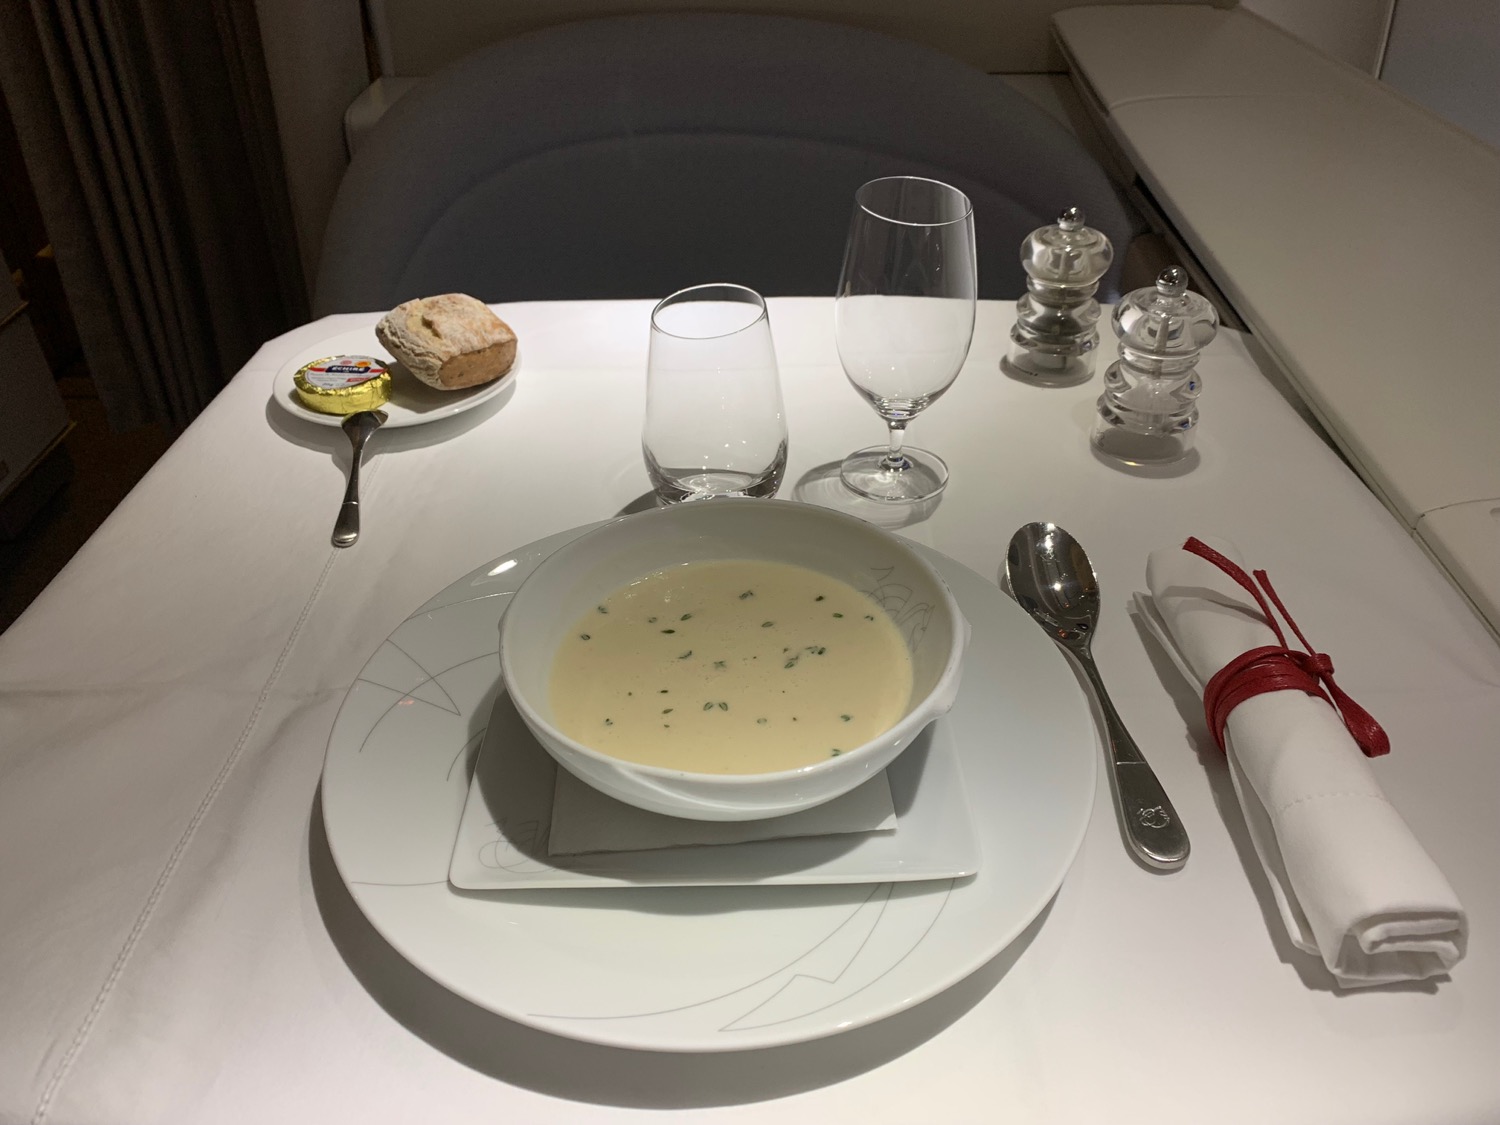 a bowl of soup on a plate with a napkin and fork